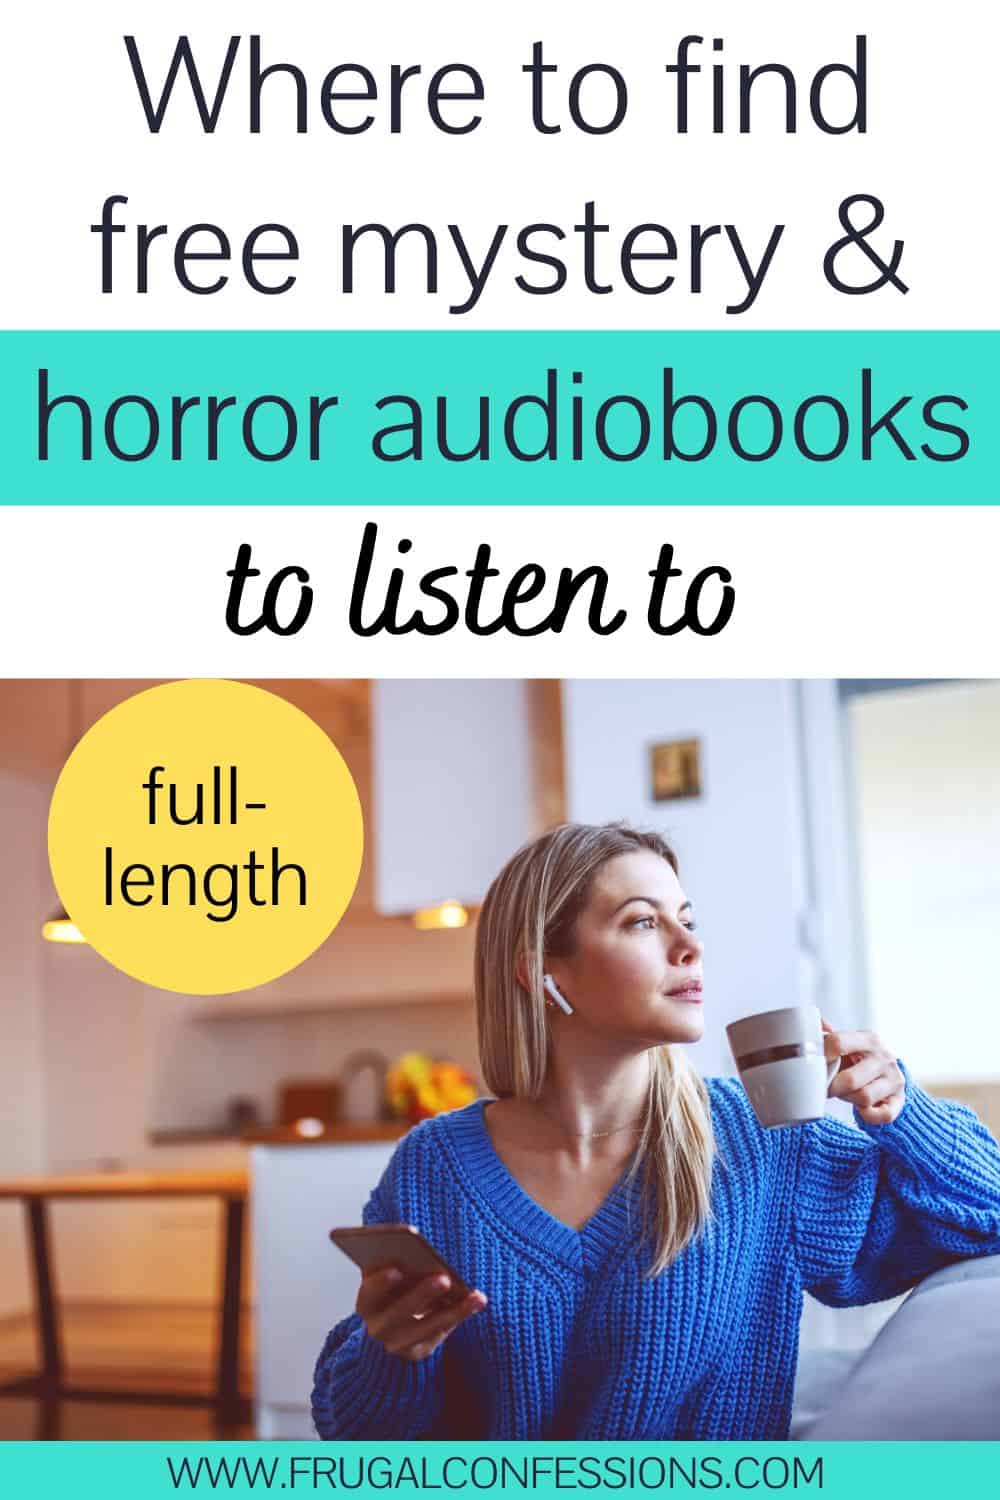 11 Horror Audio Books Free (Plus Sources to Fill Your Playlist)